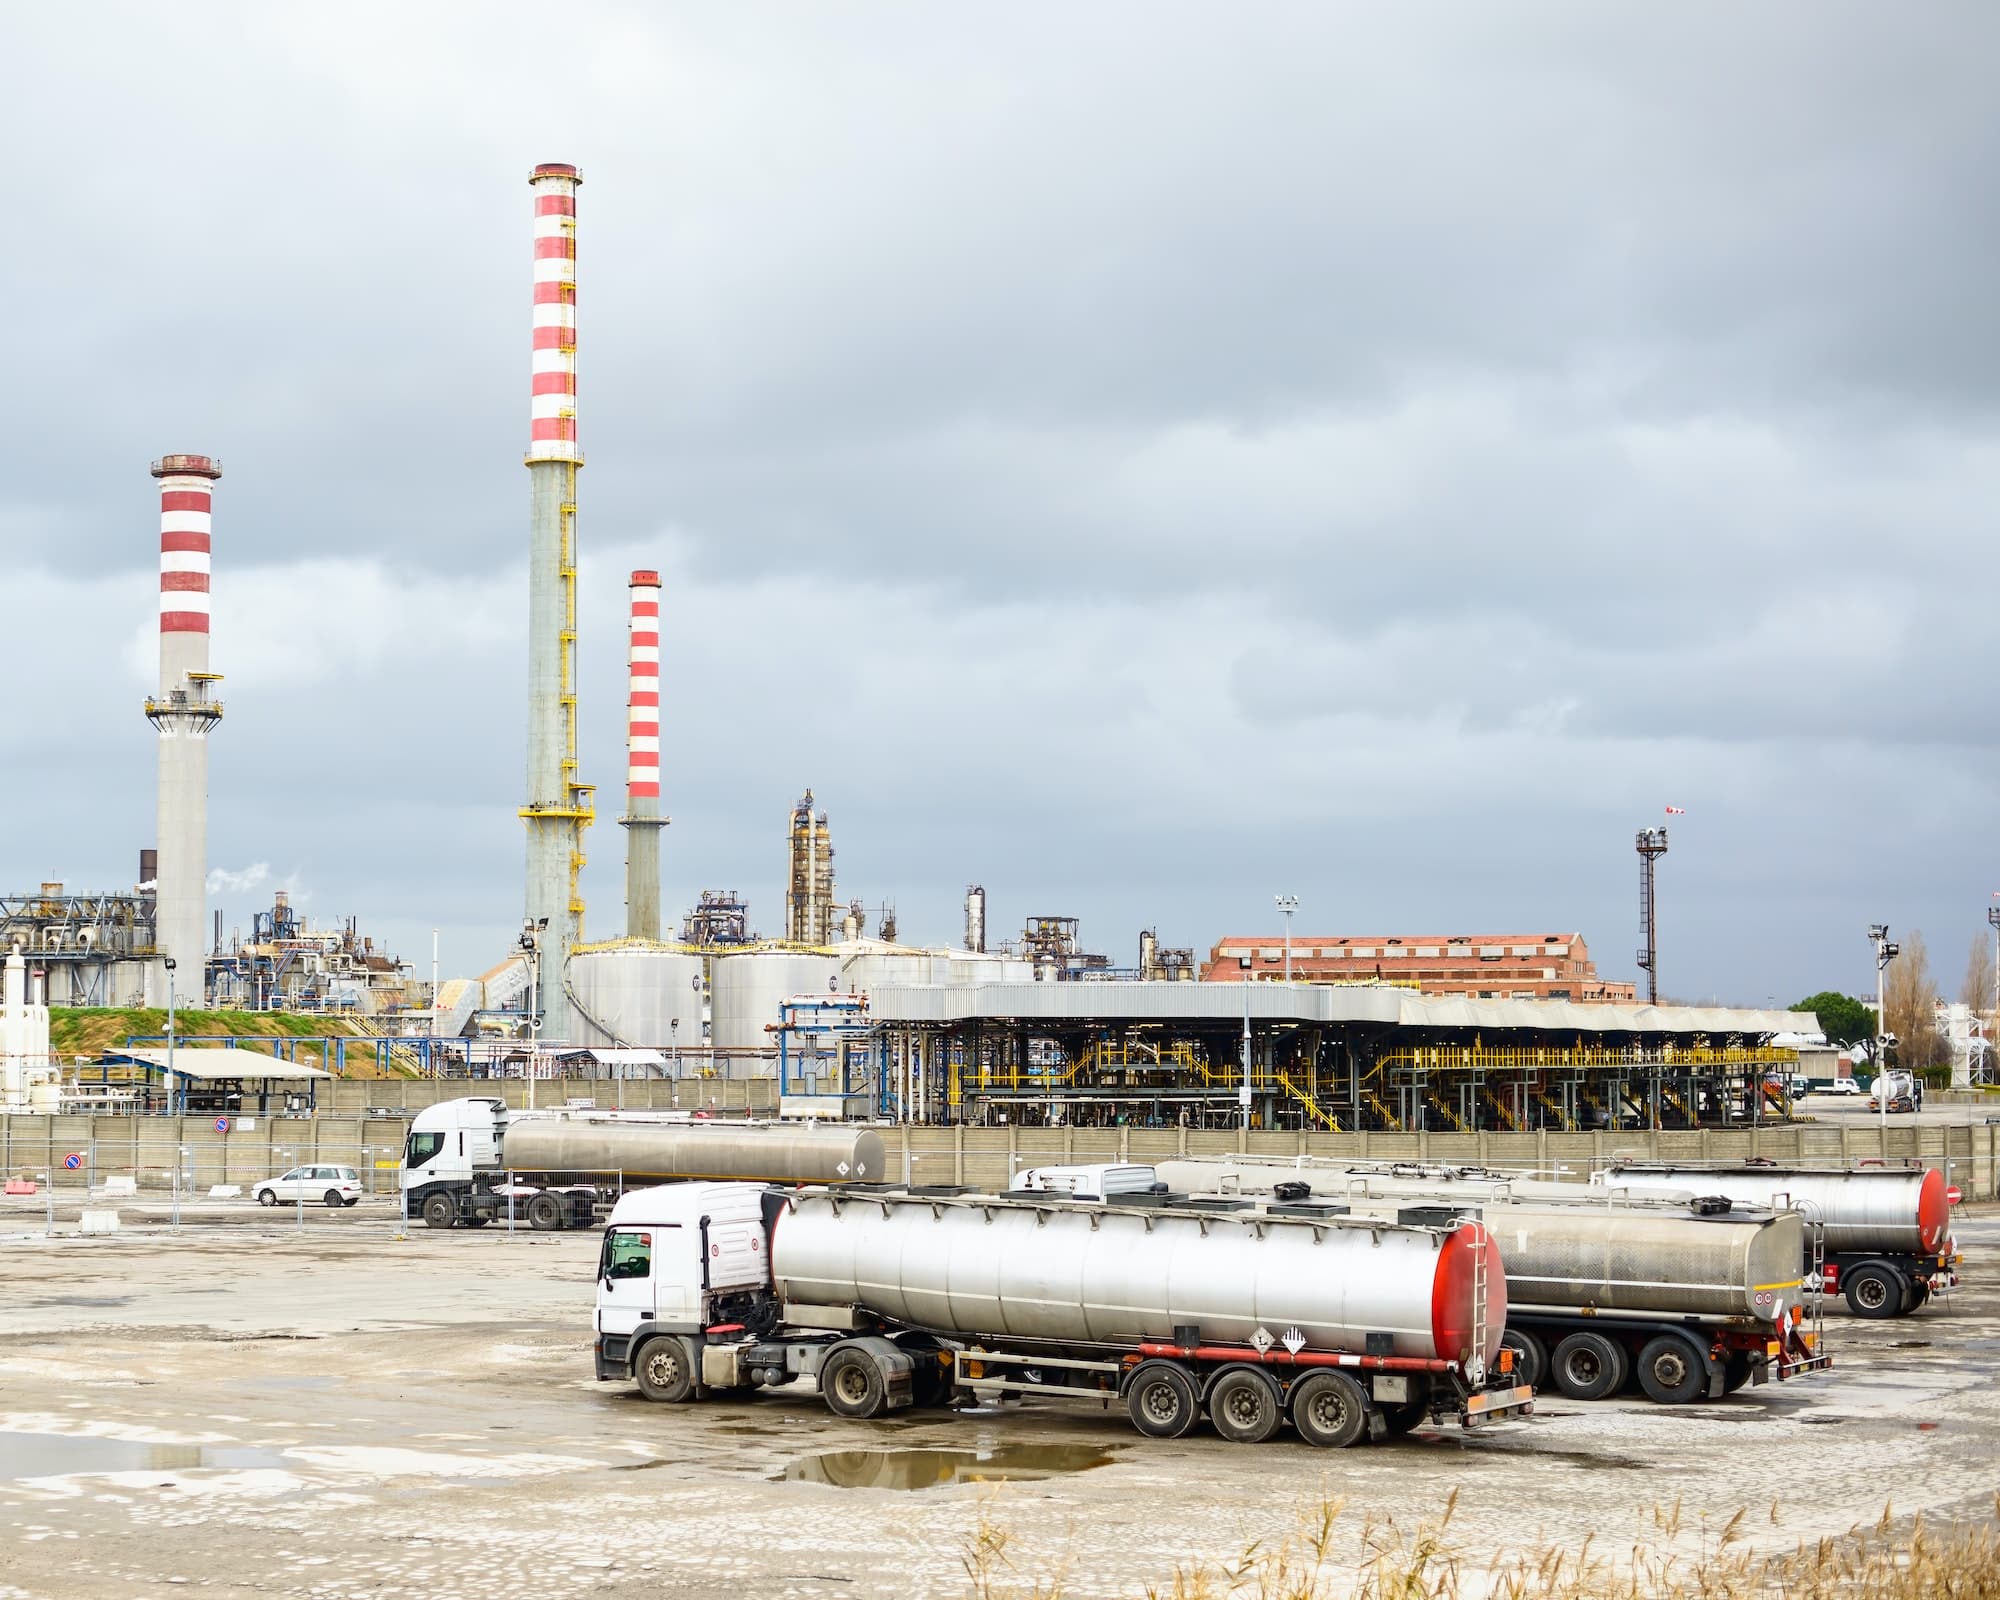 oil-refinery-industry-smoke-stacks-and-tanker-lorry-or-truck.jpg